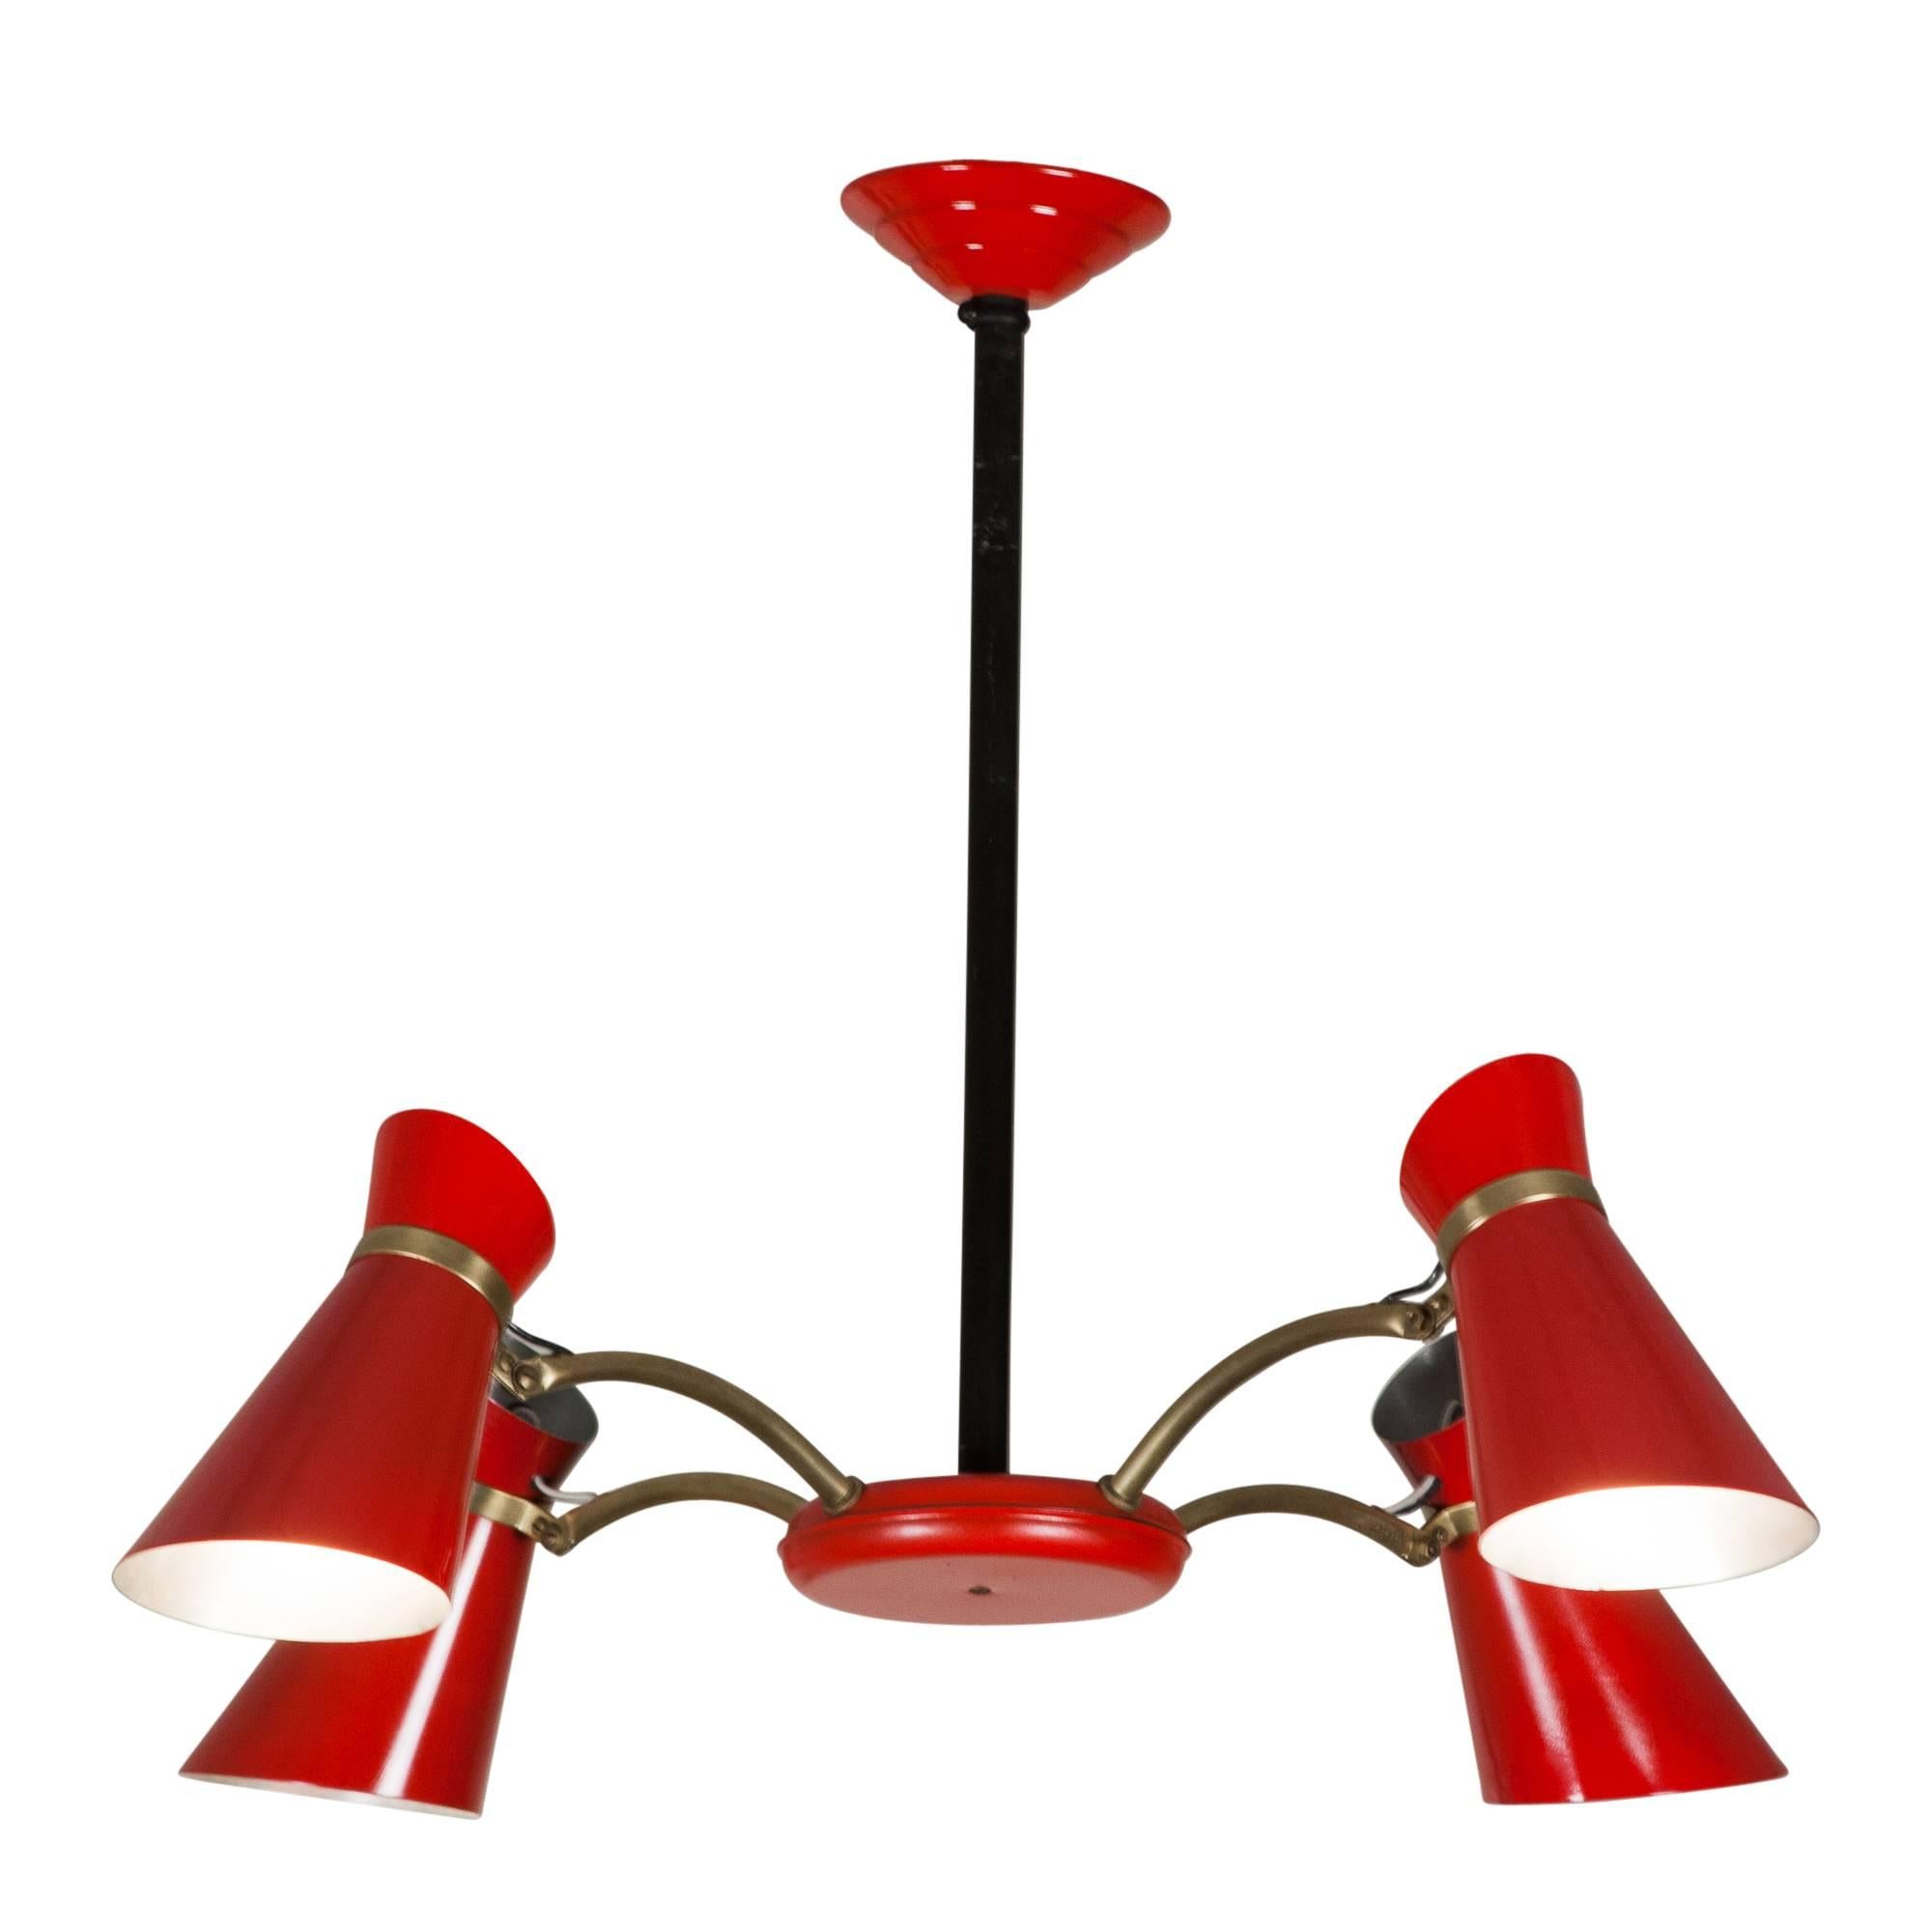 Lacquered metal and brass four-light chandelier, the shades and central disc in bright red, each shade with three bands of perforations and each shade adjustable with a hinge joint, French, 1950s. Measures: Diameter 26 in, overall height 20 in,